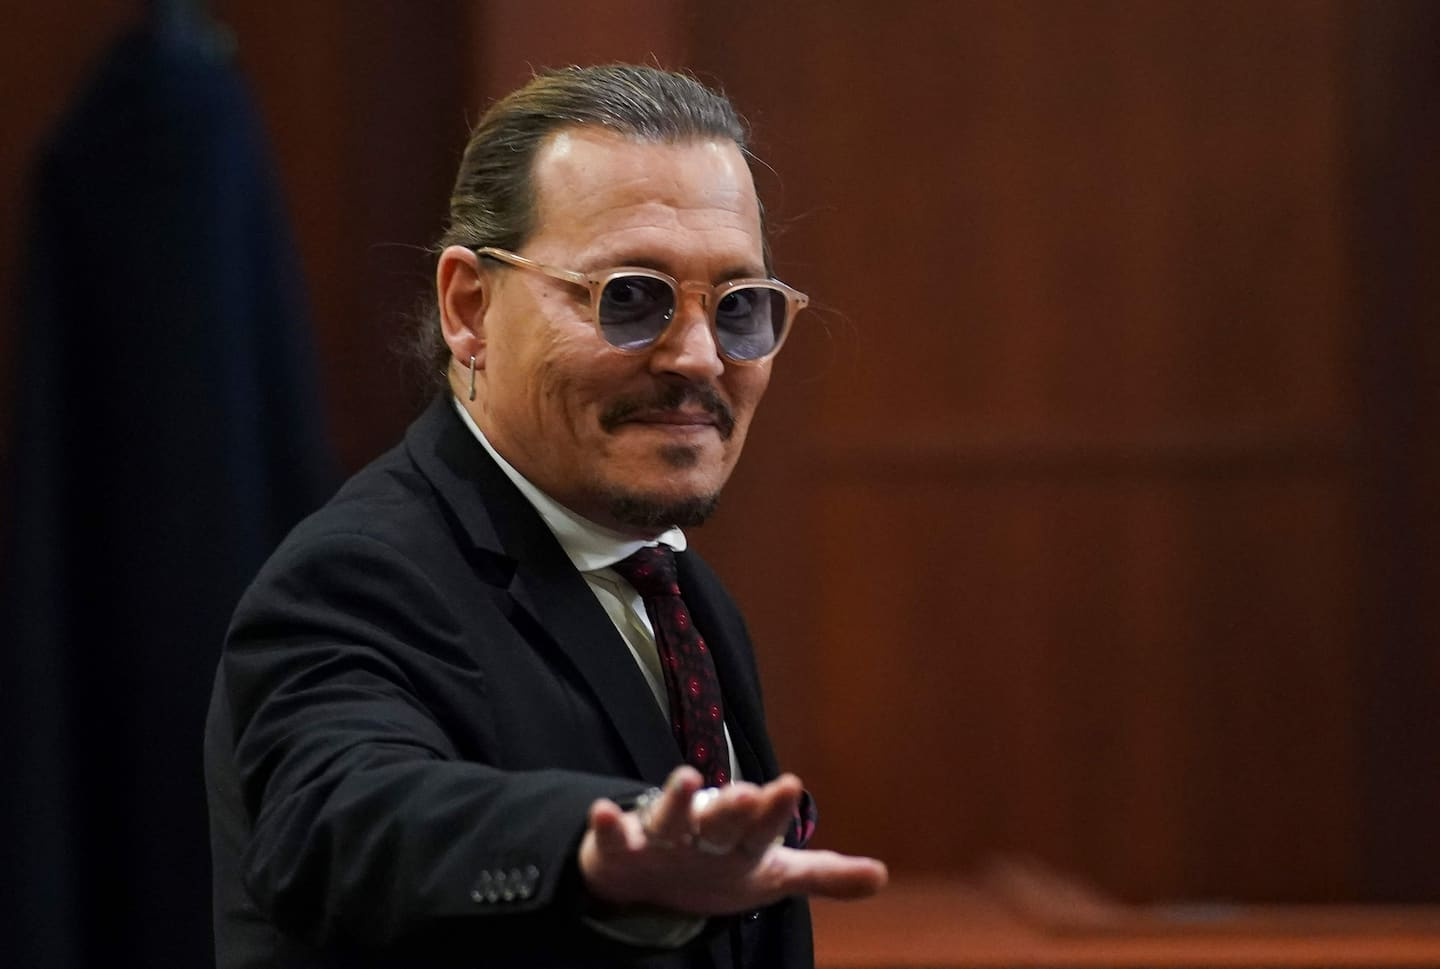 After his legal victory, can Johnny Depp hope to revive his career?